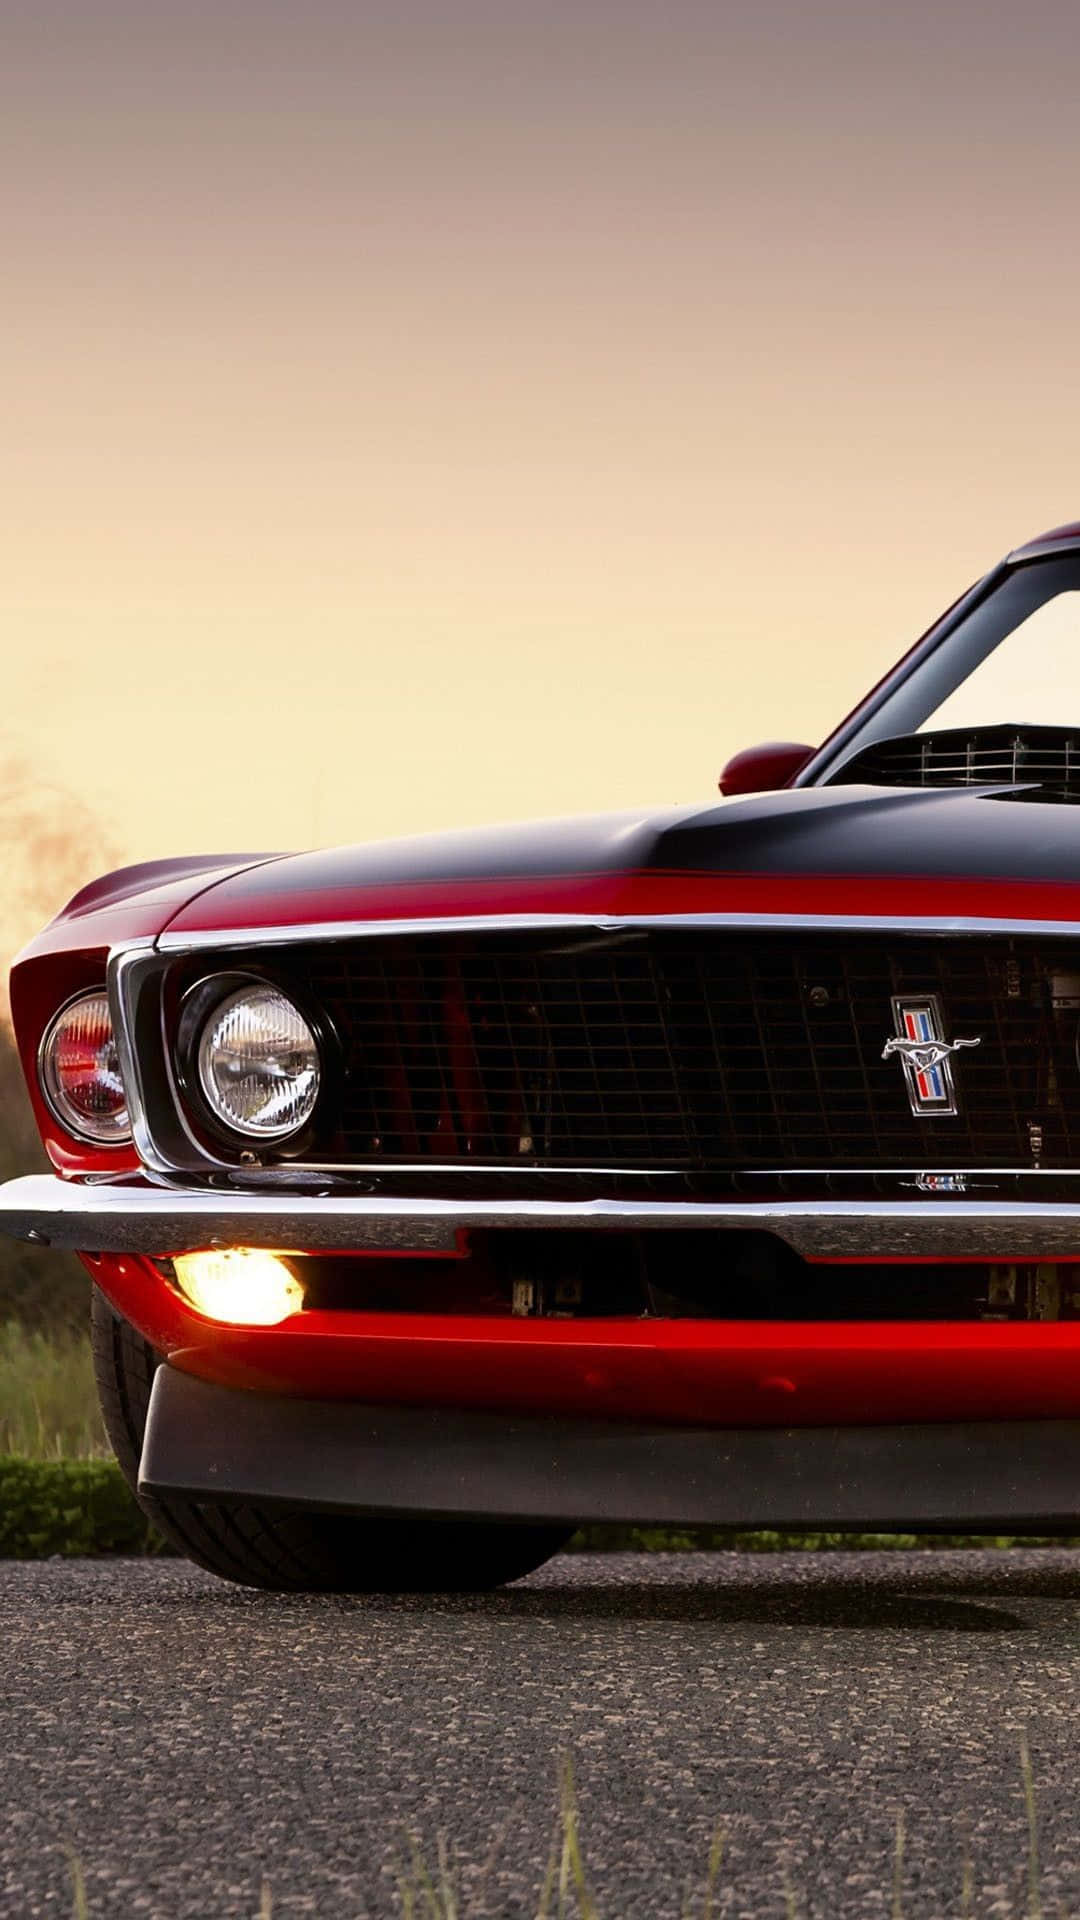 Showcase your sense of style with this sleek Red Car iPhone wallpaper Wallpaper